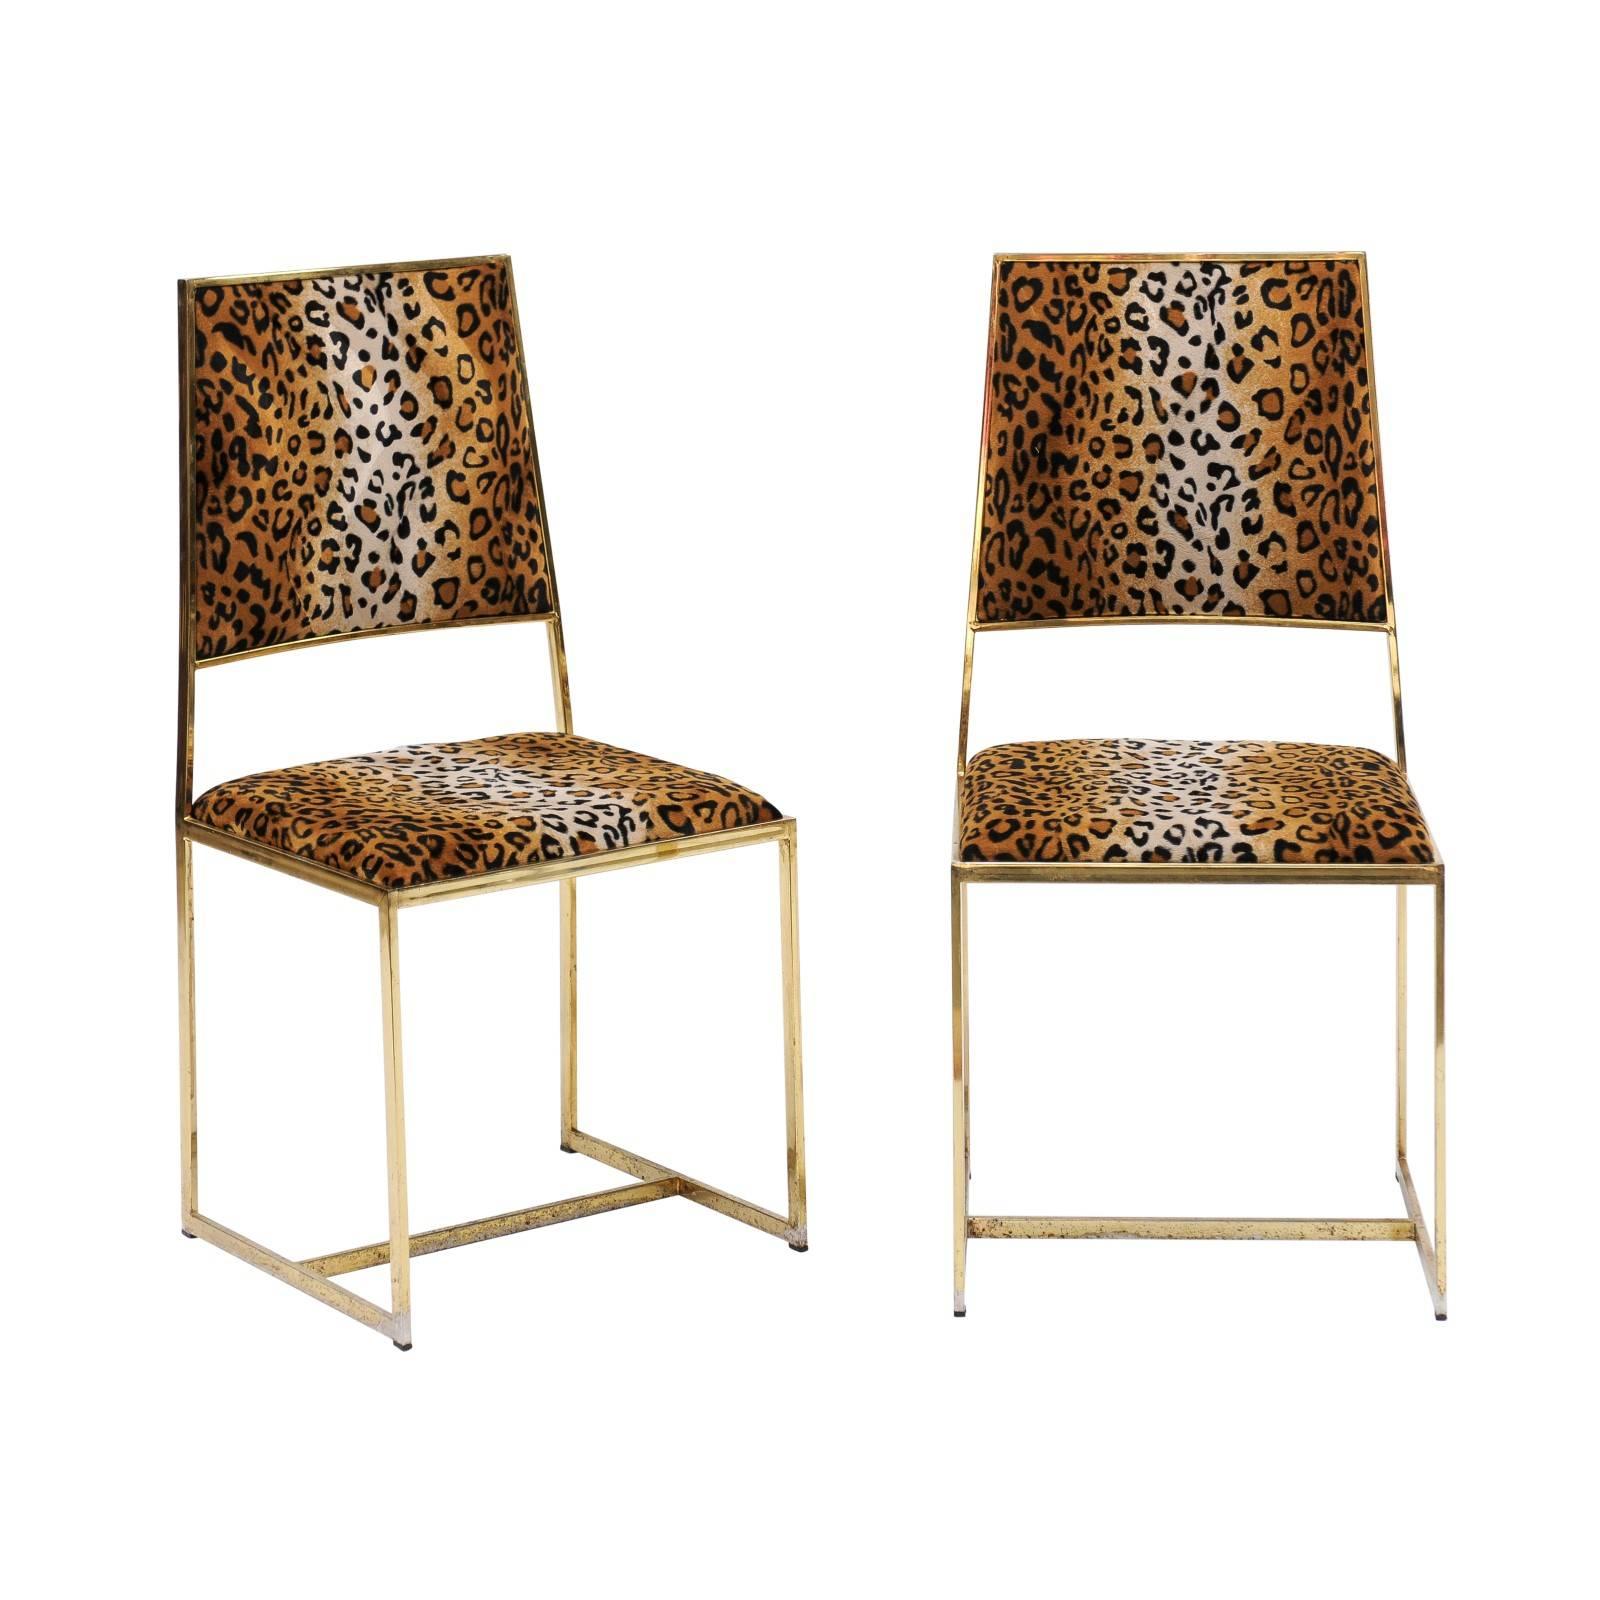 Pair of Vintage French 1970s Animal Print and Brass Side Chairs with Stretcher